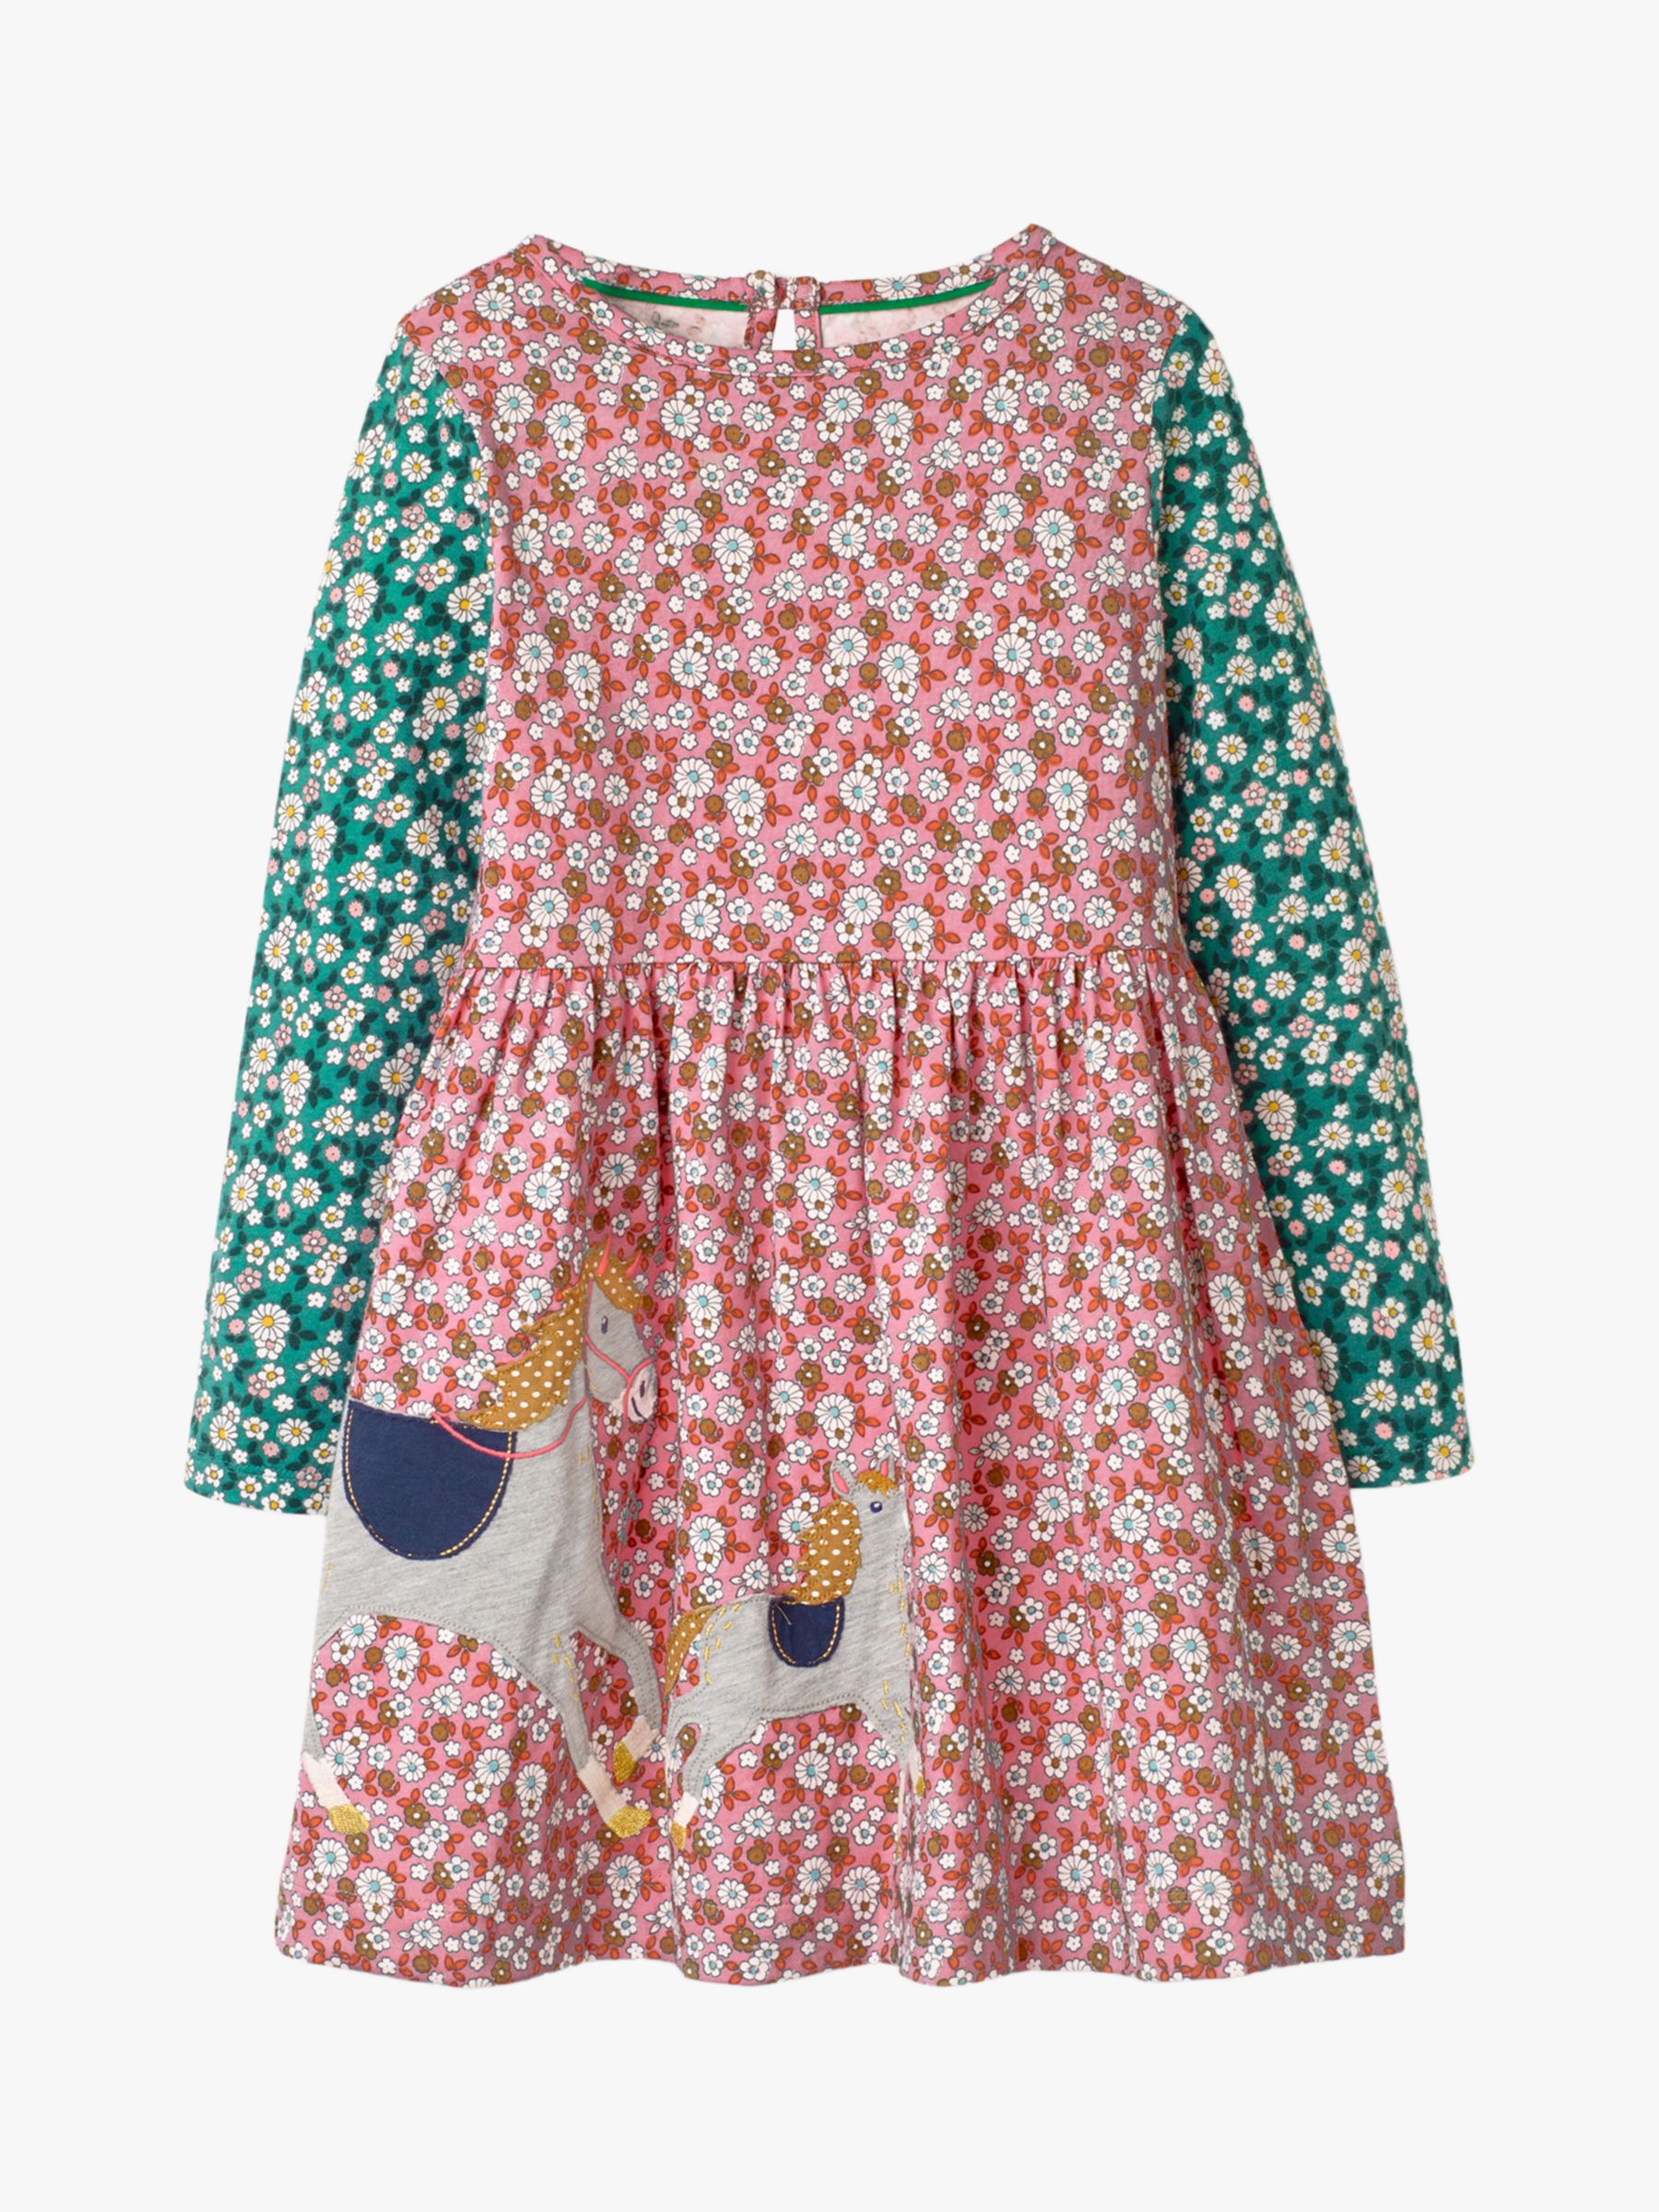 Image of Mini Boden Girls Horse Appliqu Floral Hotchpotch Dress Red Vintage